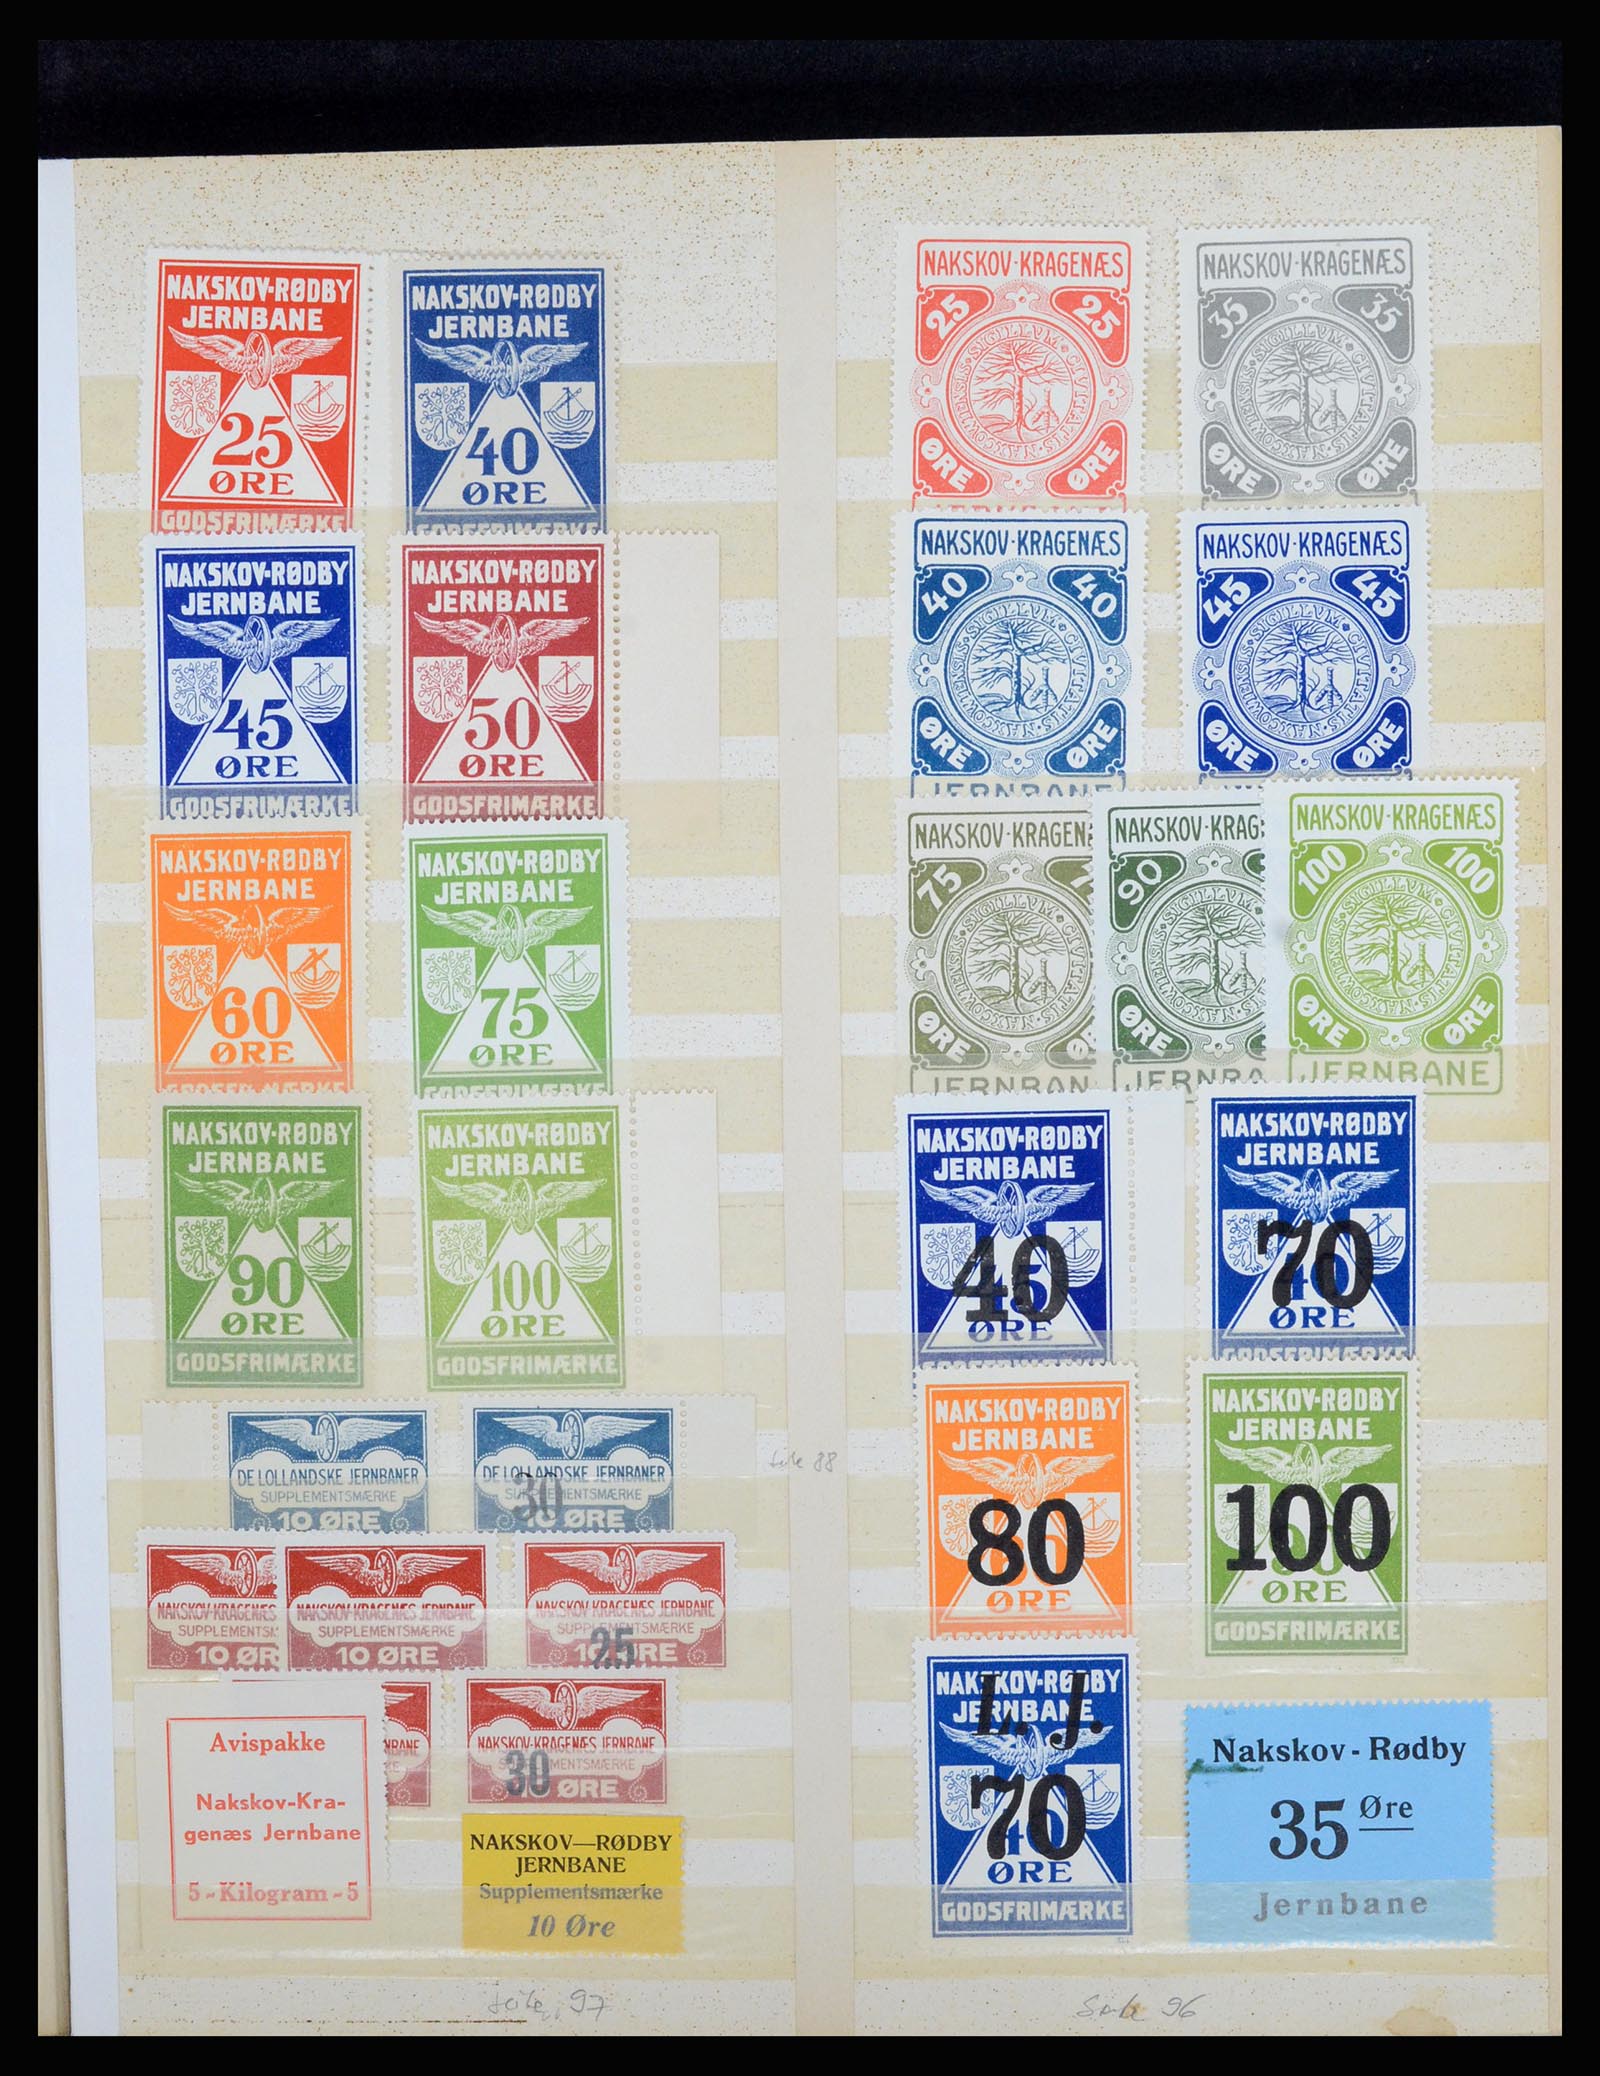 36767 015 - Stamp collection 36767 Denmark railroadstamps.